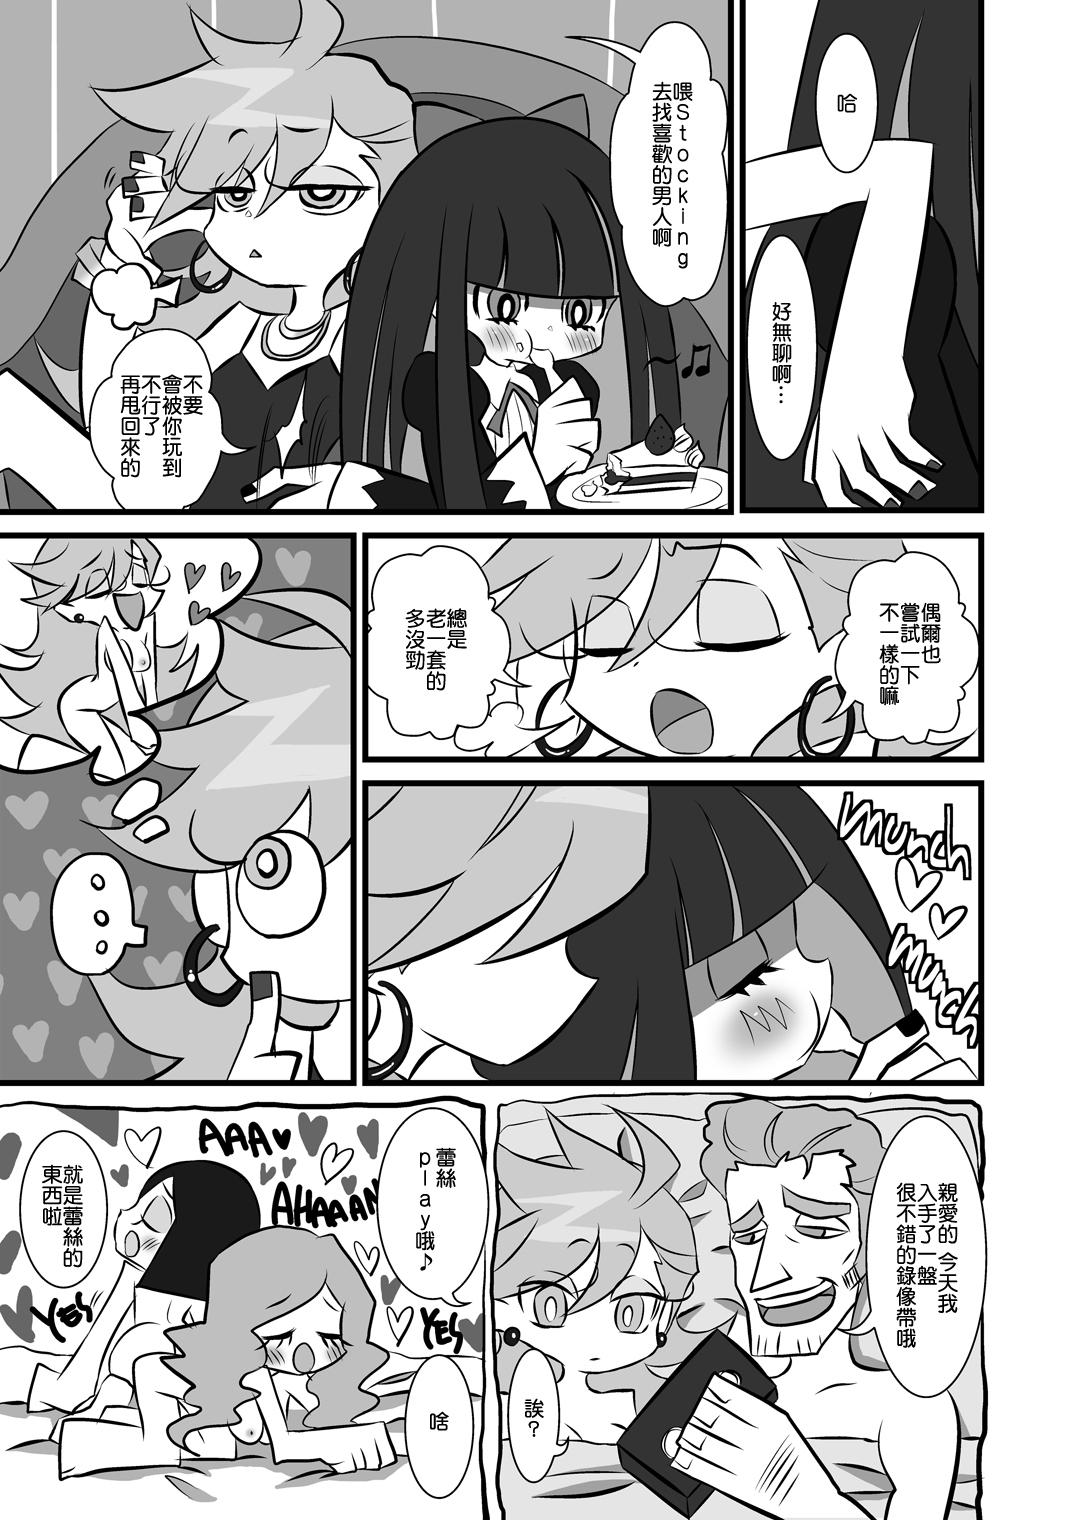 Girls Getting Fucked Chu Chu Les Play - lesbian play - Panty and stocking with garterbelt Creamy - Page 5